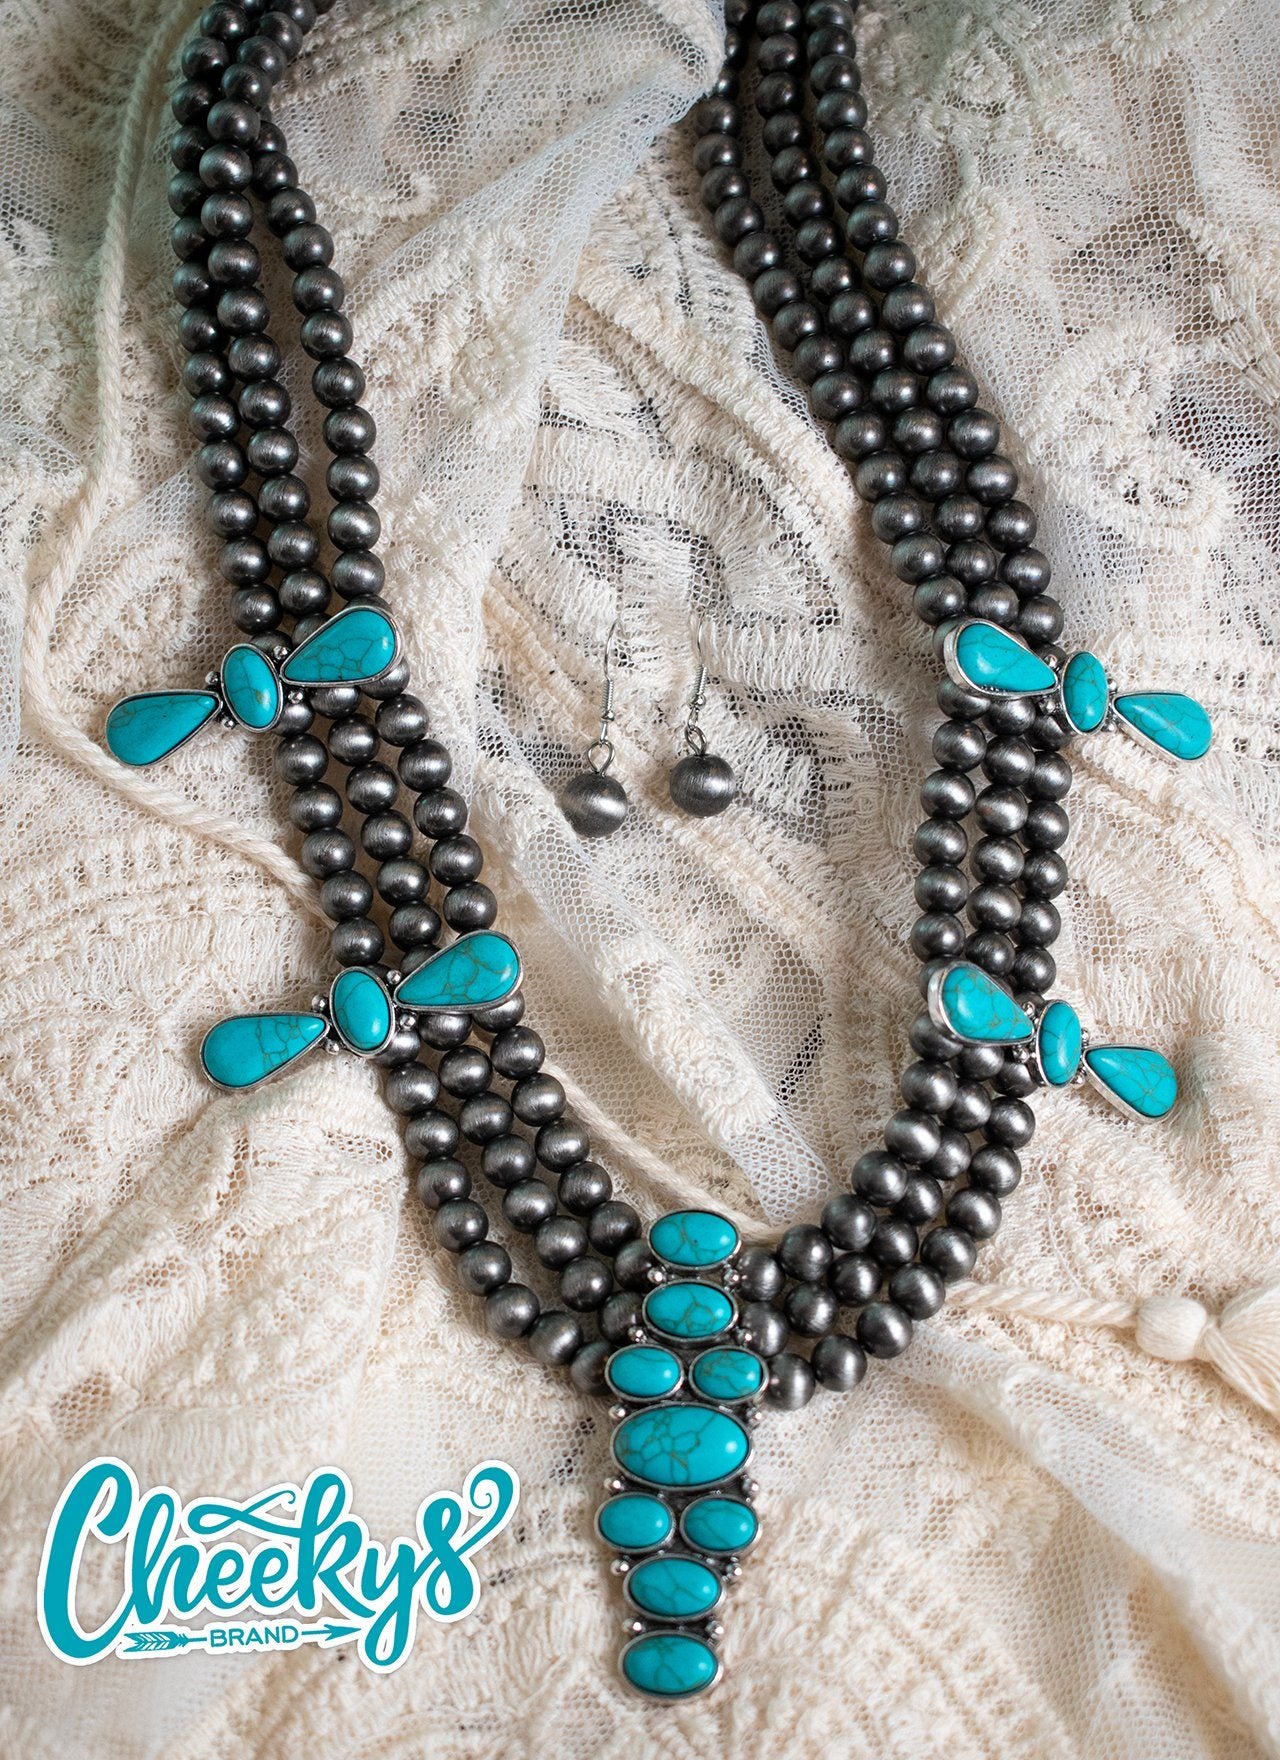 Emma Navajo Pearl and Turquoise Necklace and Earring set! Cheekys Brand 